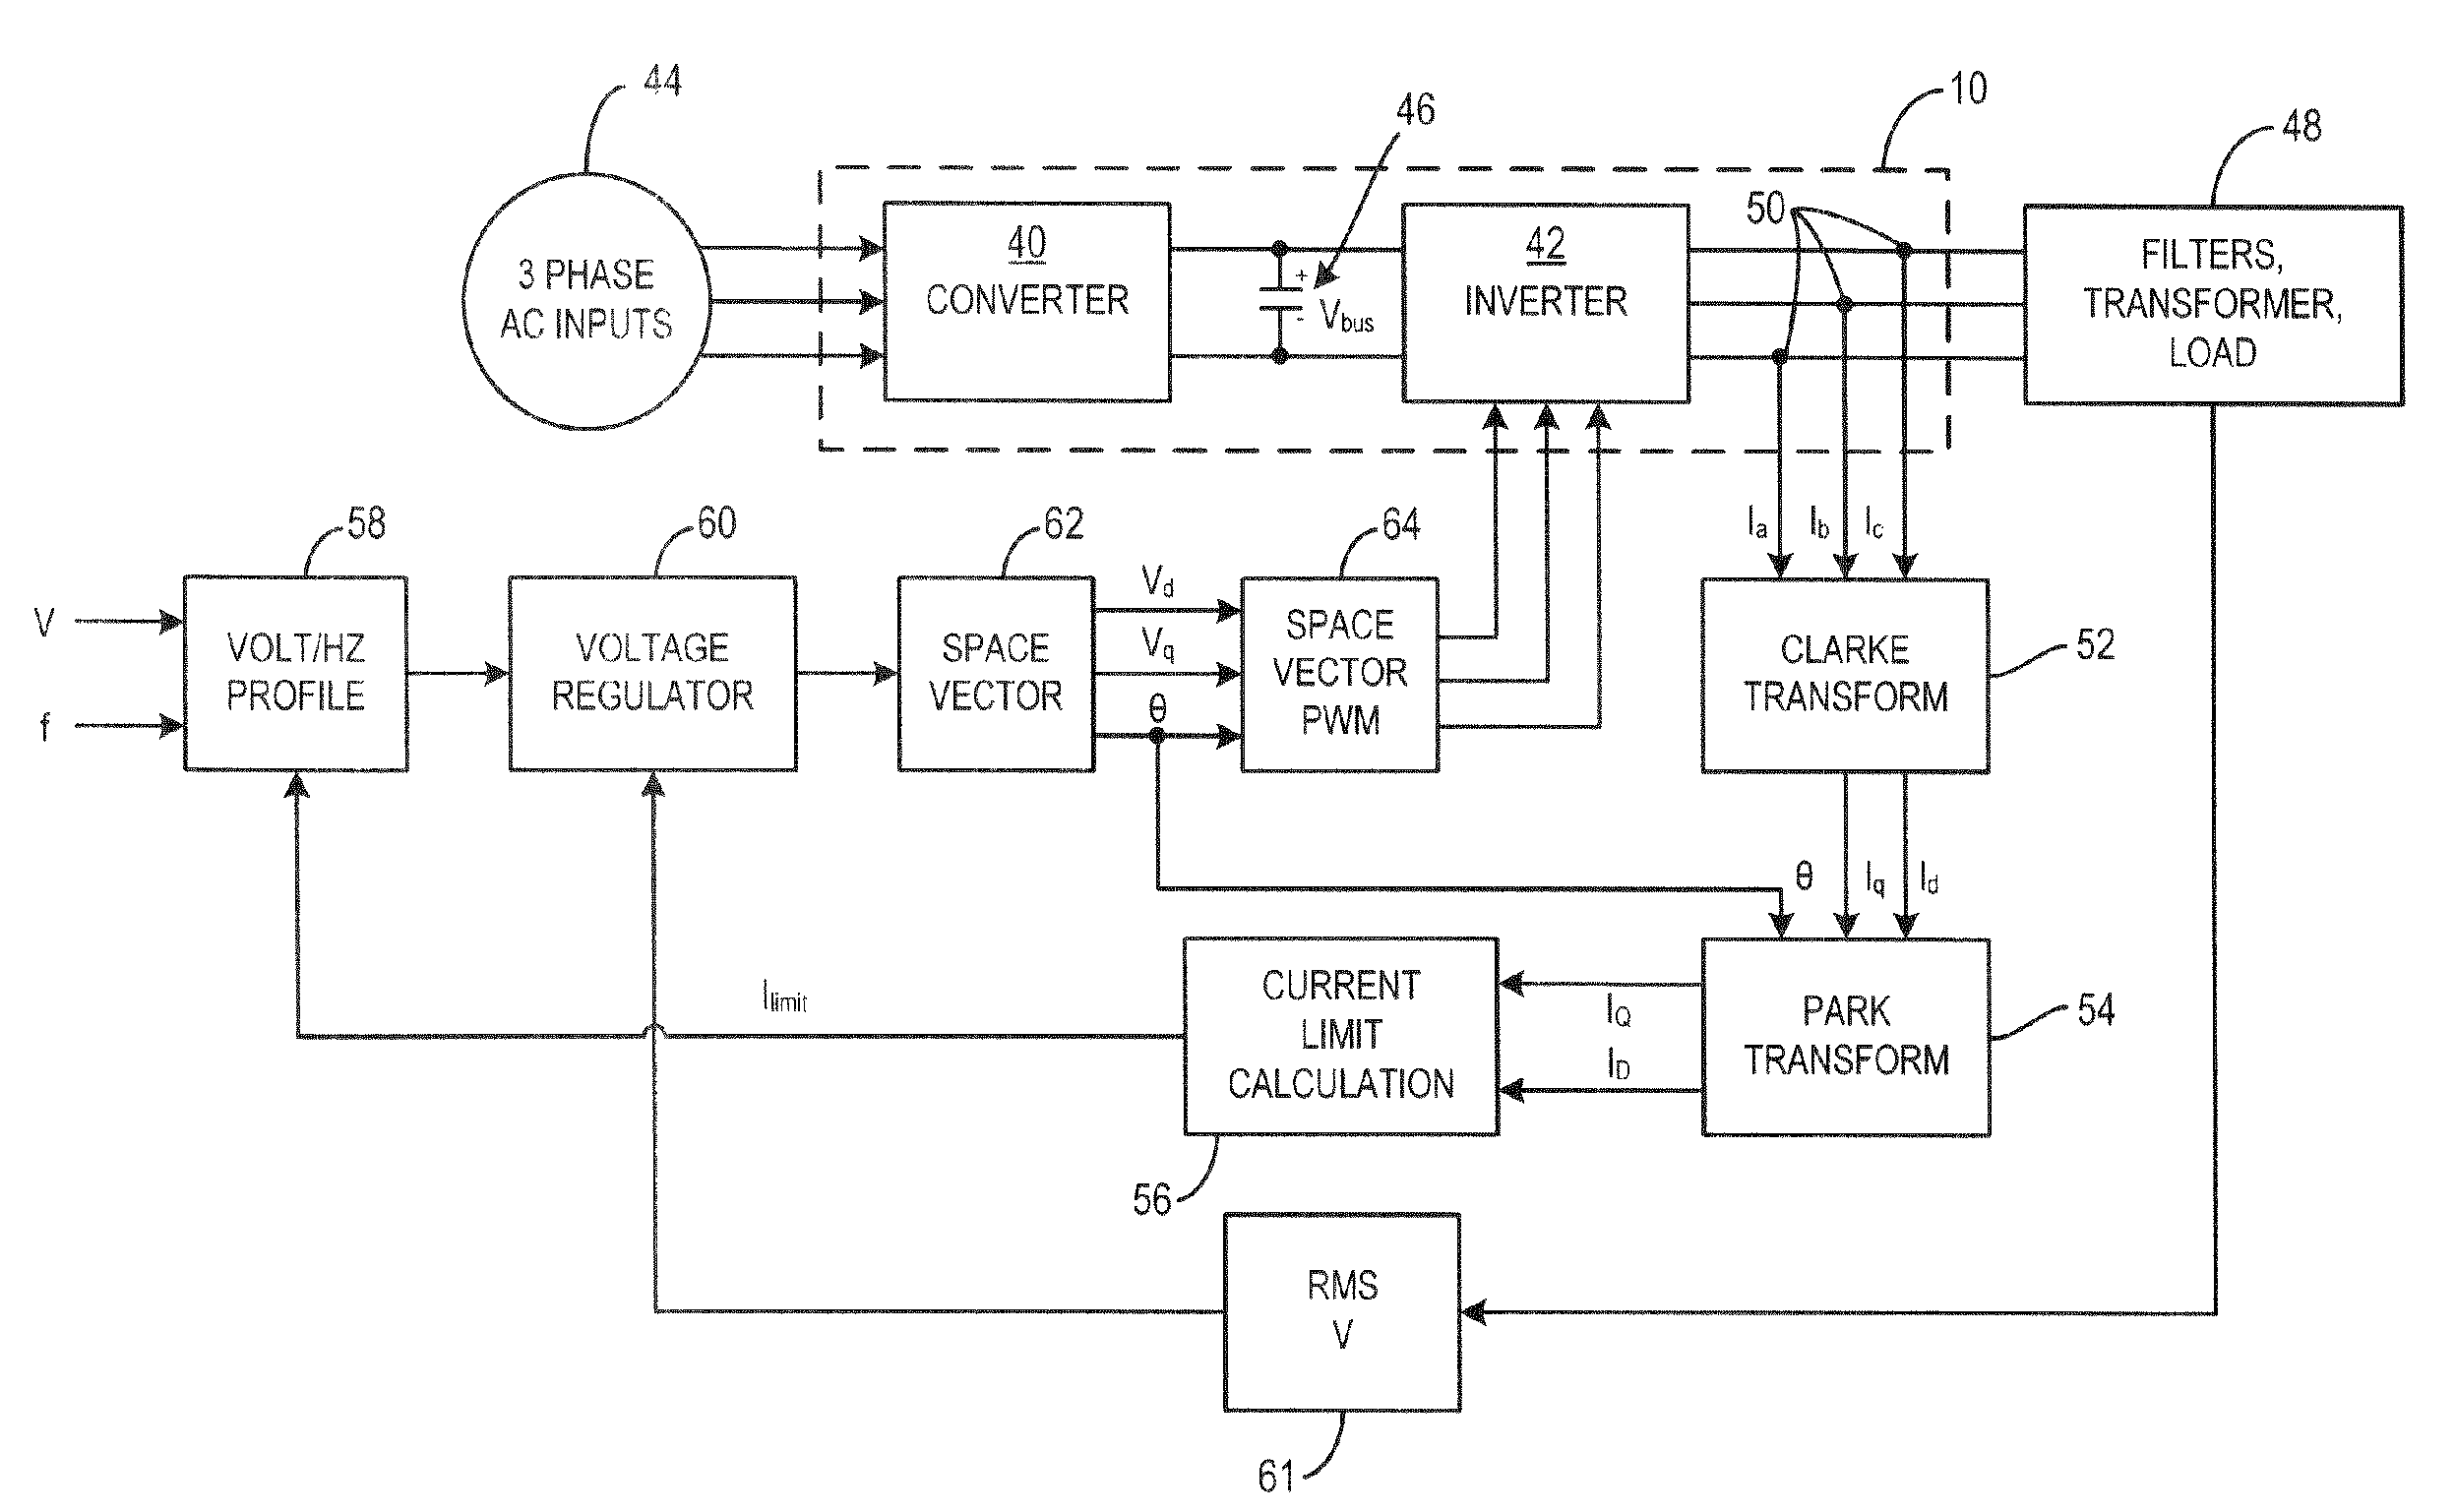 System and method of controlling the start-up of an adjustable speed motor drive based sinusoidal output power conditioner